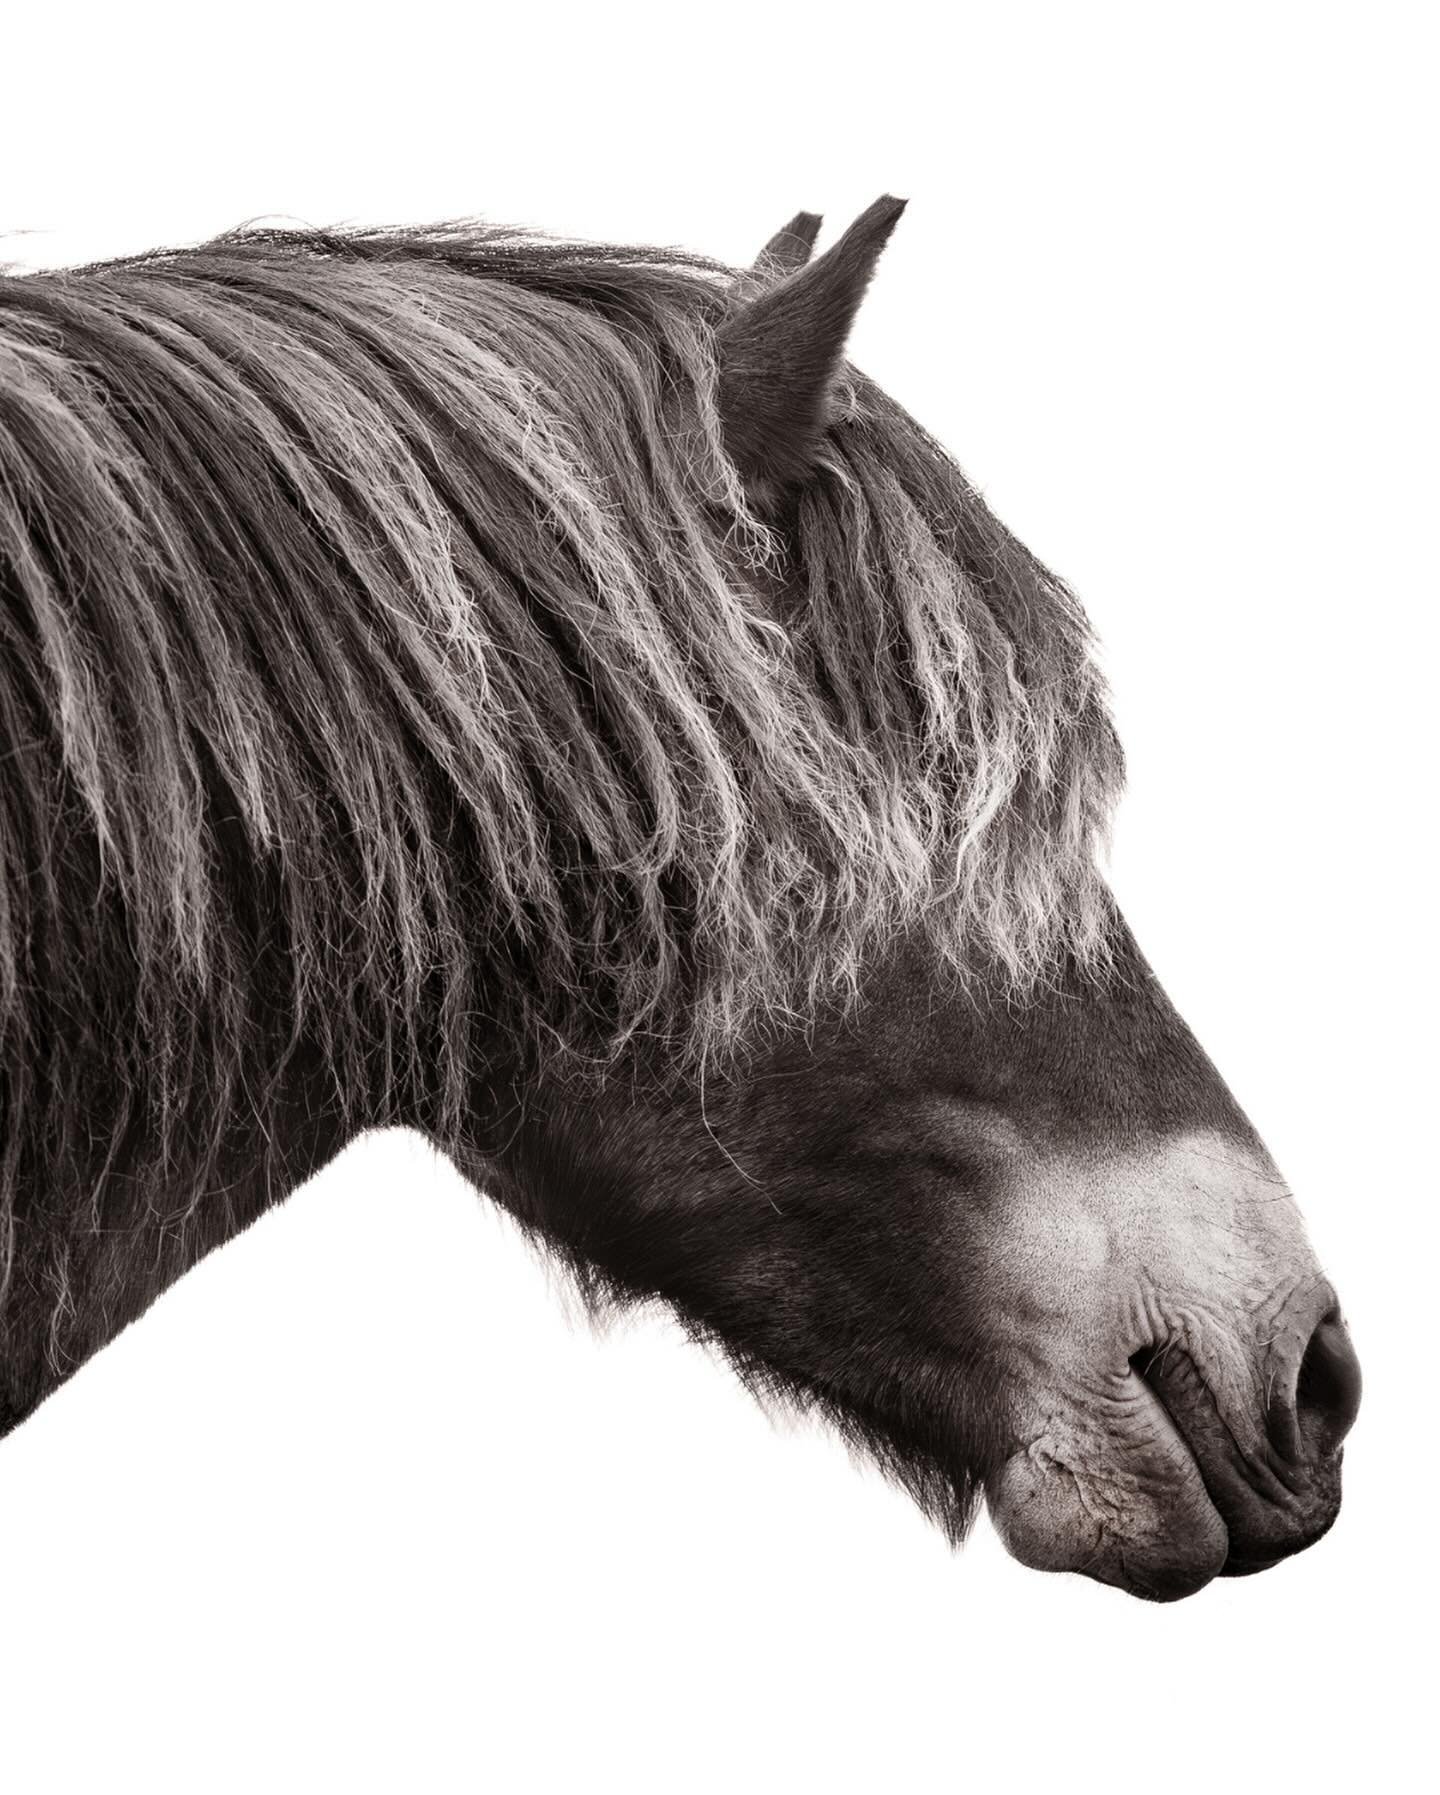 &ldquo;Bangs&rdquo;

The forelock or foretop or bangs is the quintessential accent for any Exmoor pony and as an artist I just love how it cascades between the ears and gently graces the forehead. Each forelock tells a tale of beauty and grace, and i